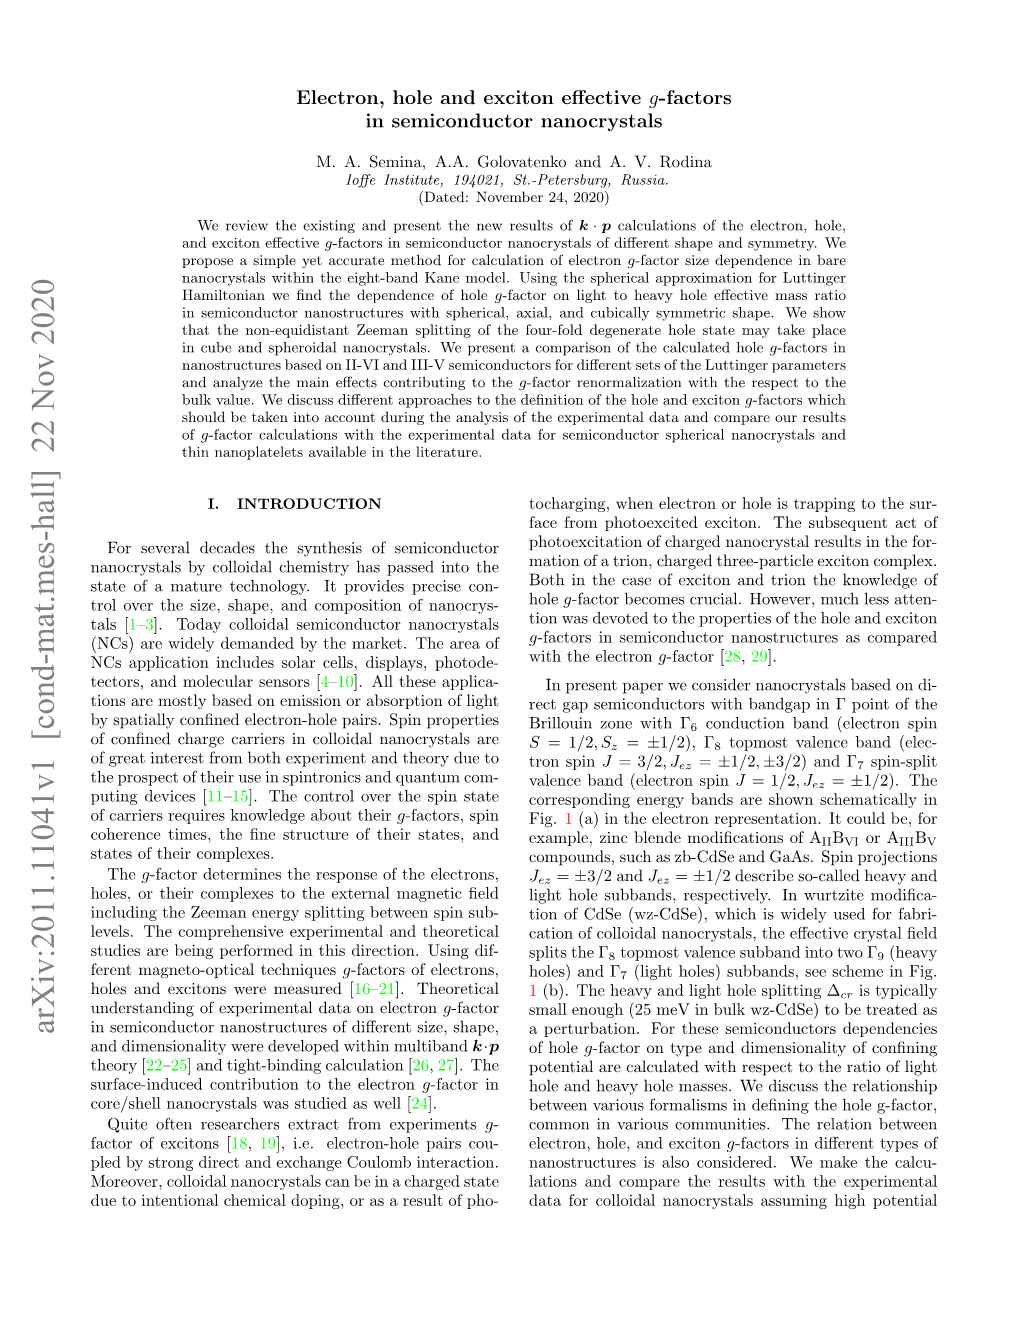 Arxiv:2011.11041V1 [Cond-Mat.Mes-Hall] 22 Nov 2020 in Semiconductor Nanostructures of Diﬀerent Size, Shape, a Perturbation